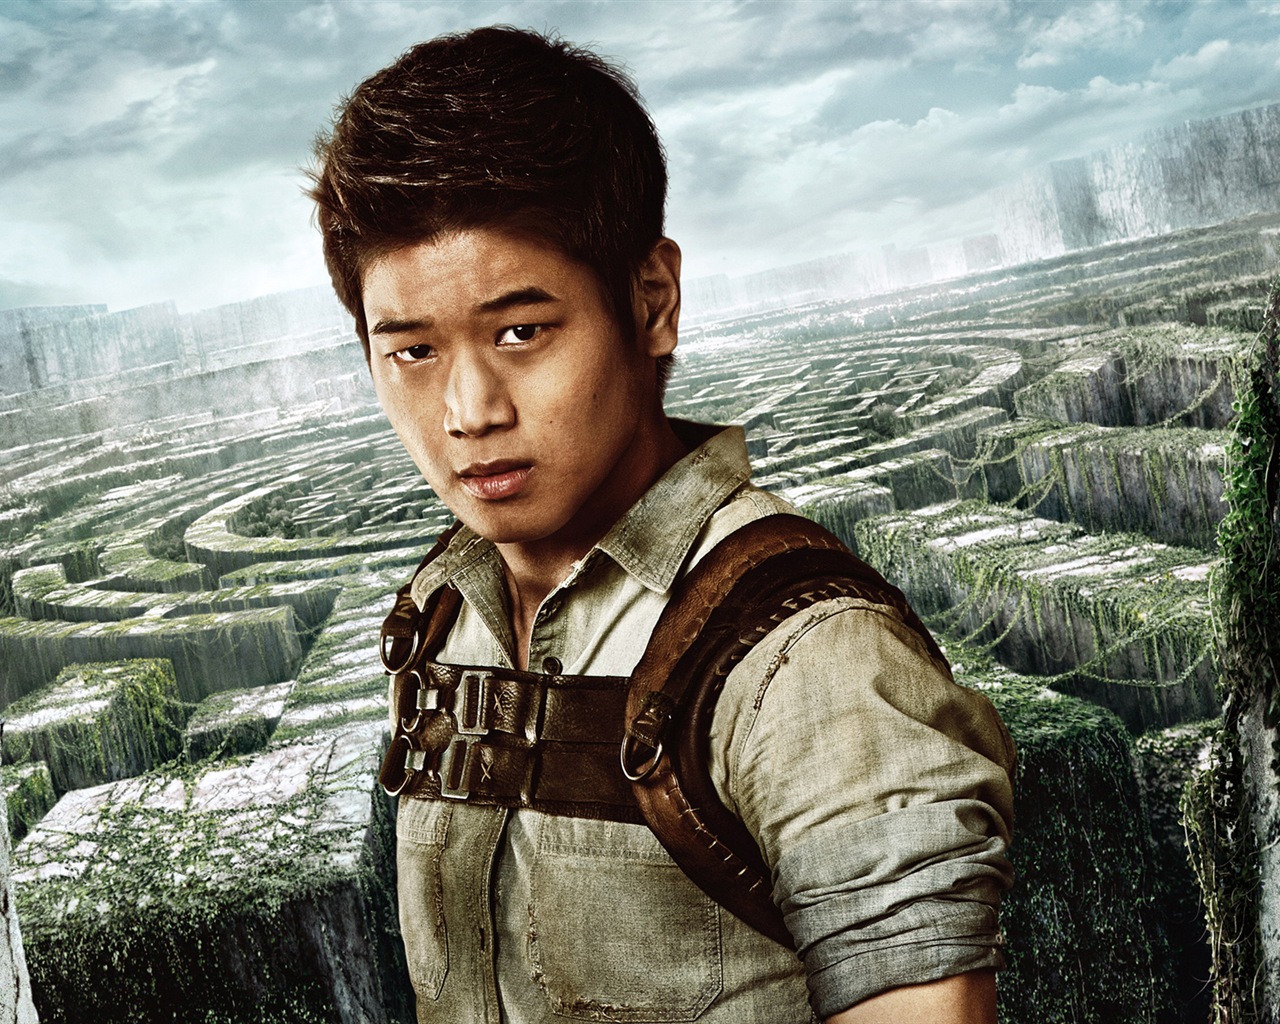 The Maze Runner HD movie wallpapers #10 - 1280x1024